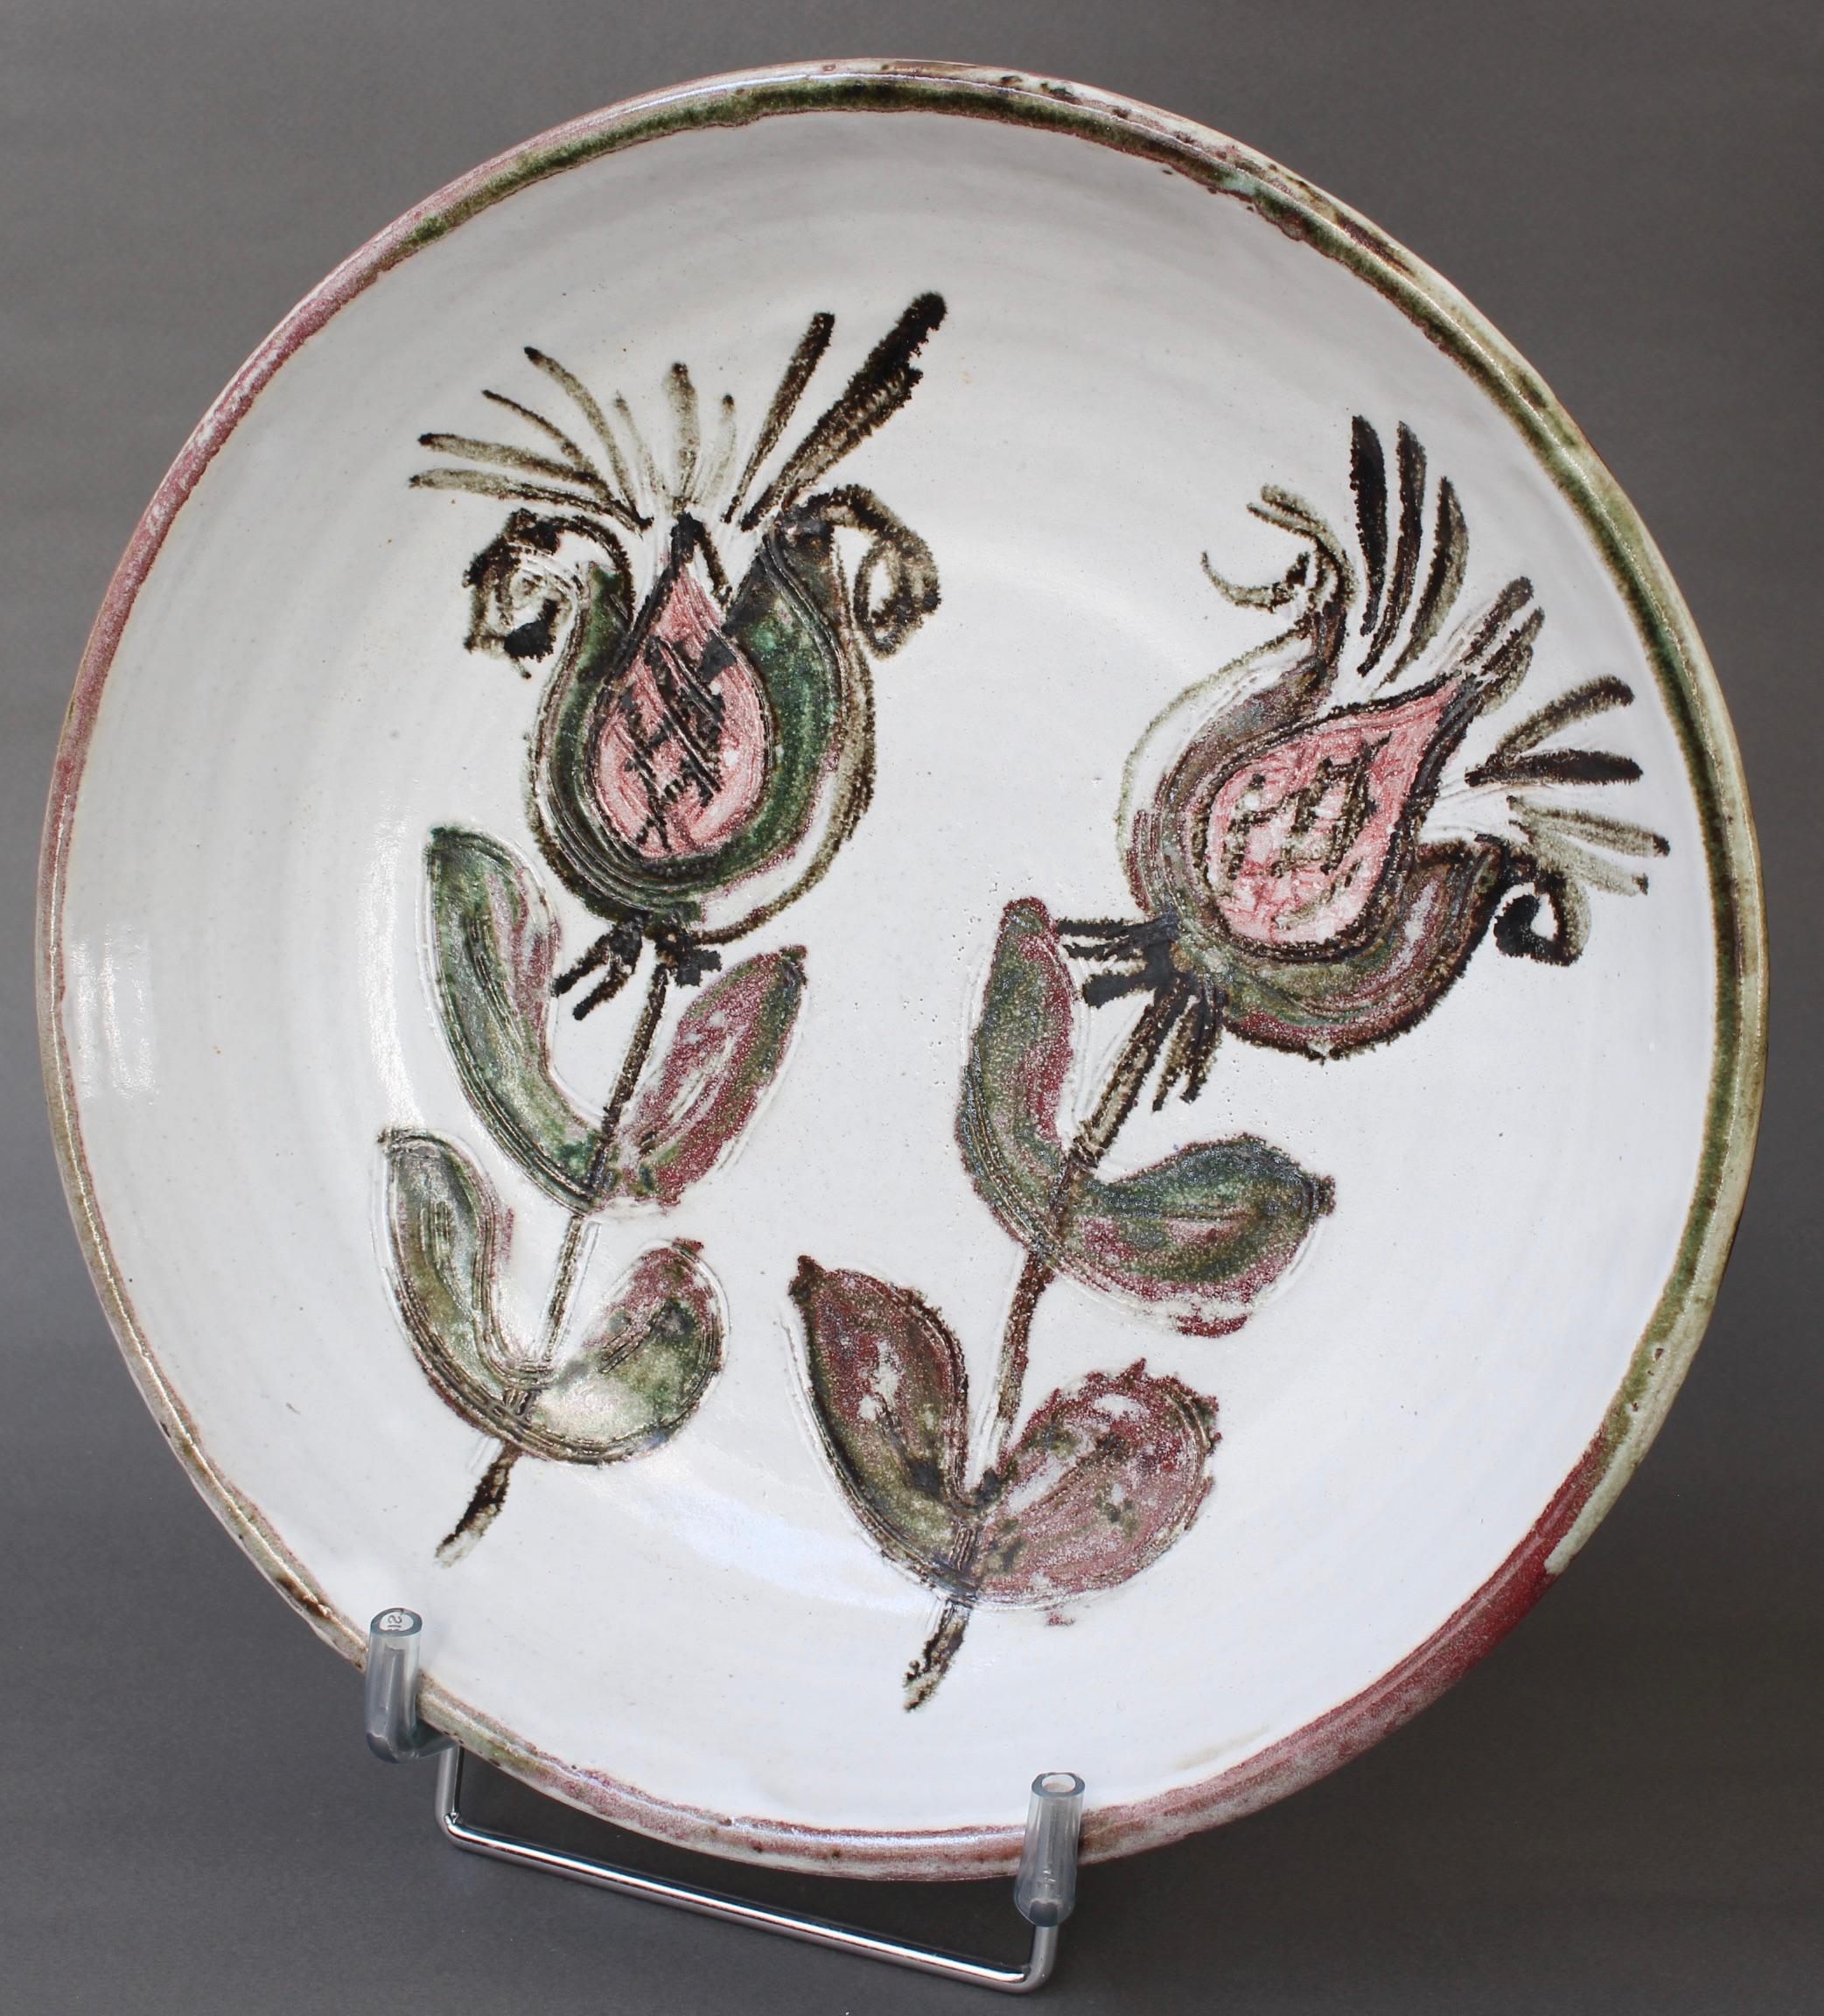 Mid-century decorative platter (circa 1960s) by Albert Thiry. A pristine white glaze provides the backdrop for a colourful thistle motif in the centre recess. The rim is an earthy green with patches of mulberry-red complementing decor in the